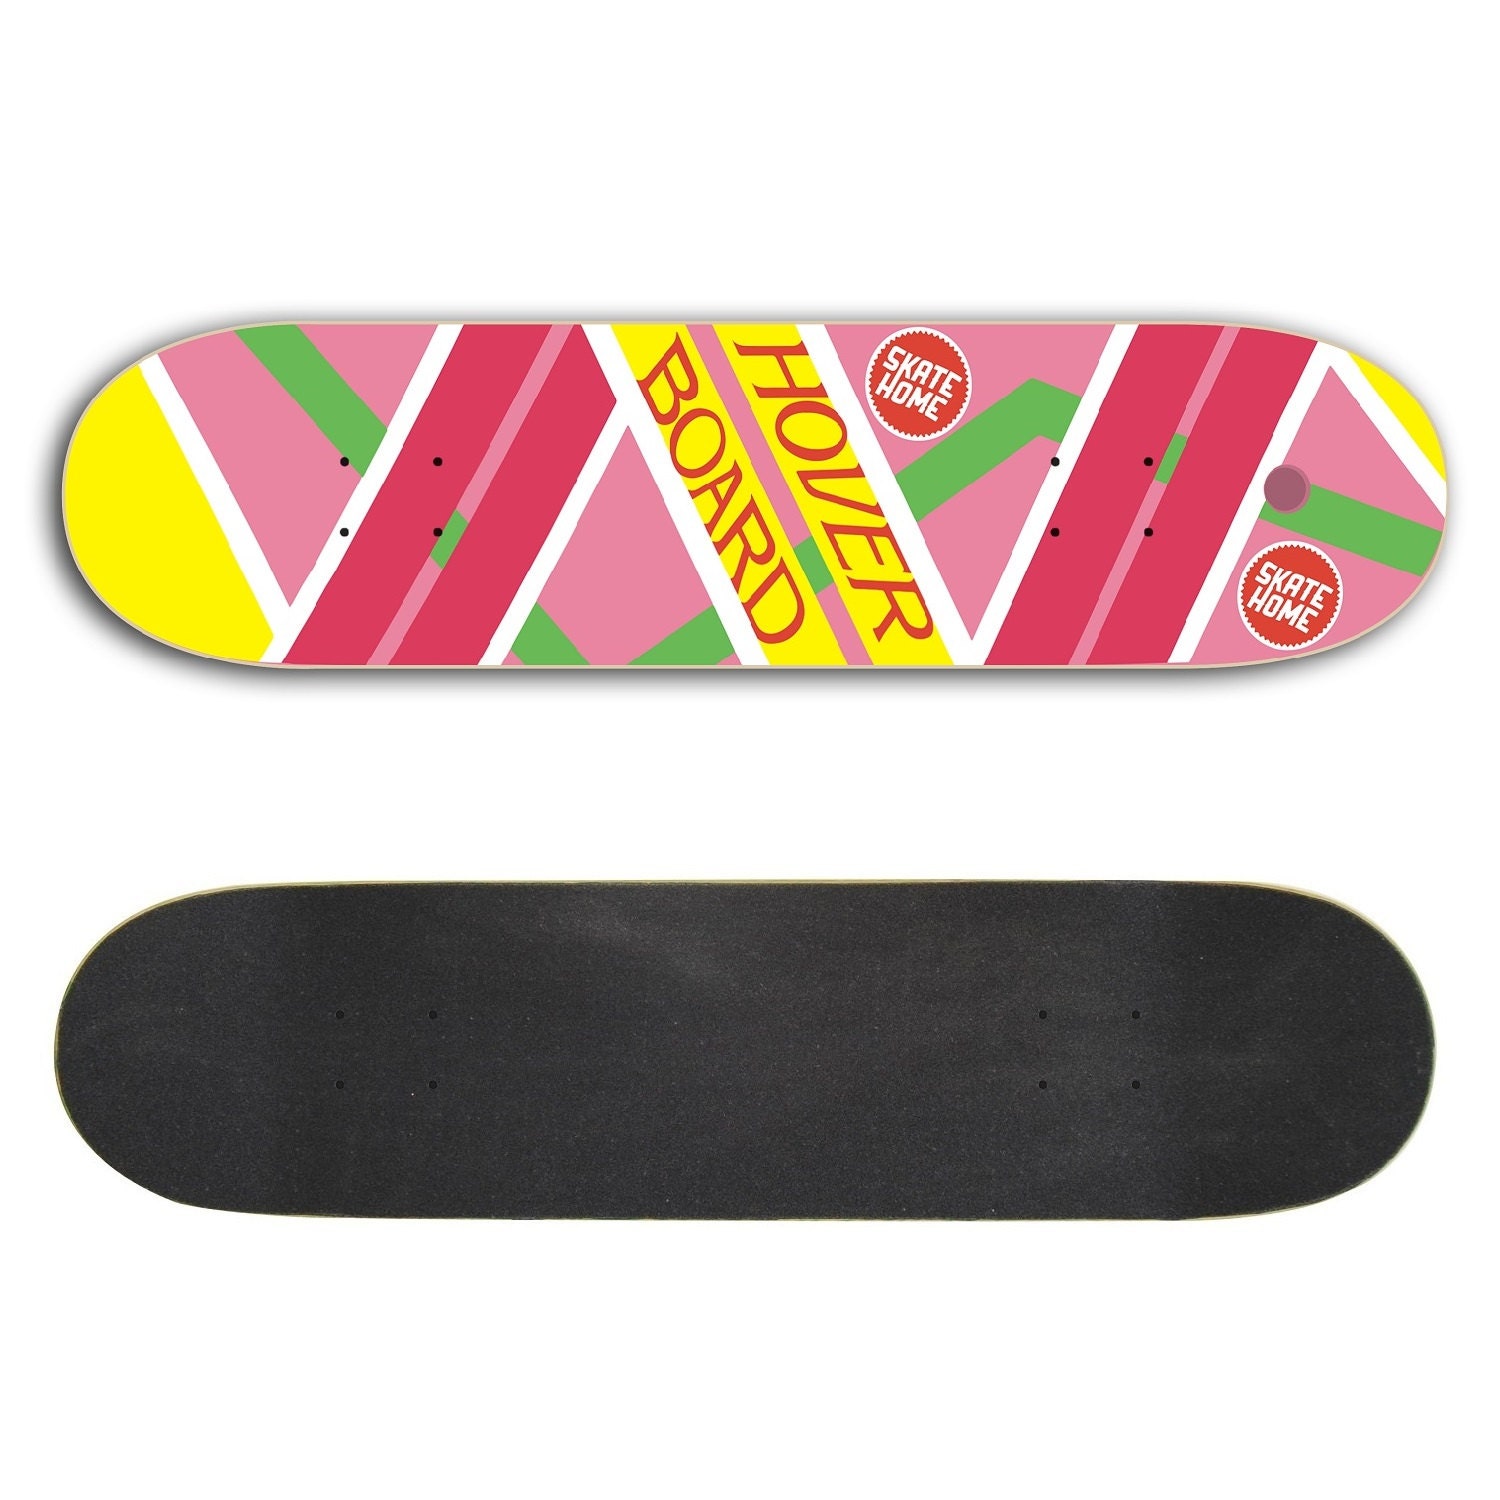 Skateboard and Free Griptape Hoverboard Back to the Future Etsy